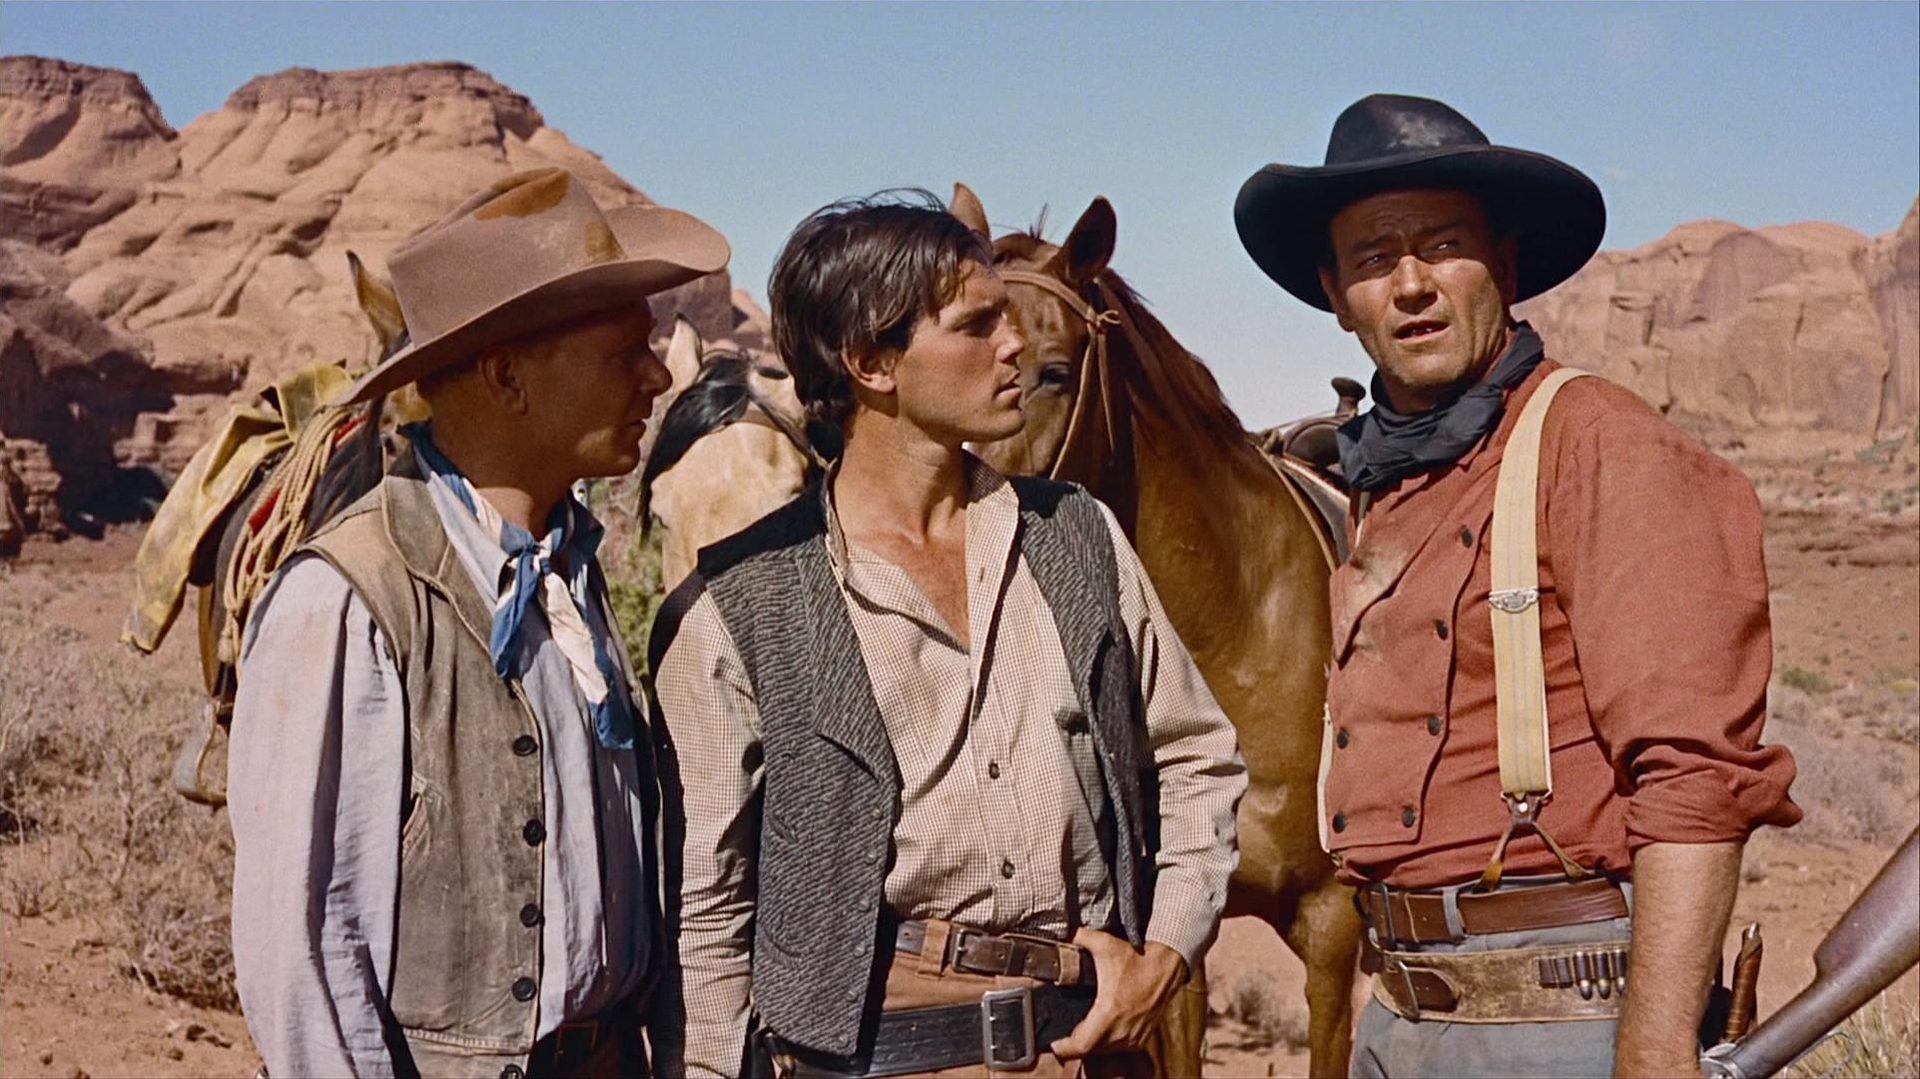 John Wayne as Ethan Edwards with two companions in a warm climate in the desert.